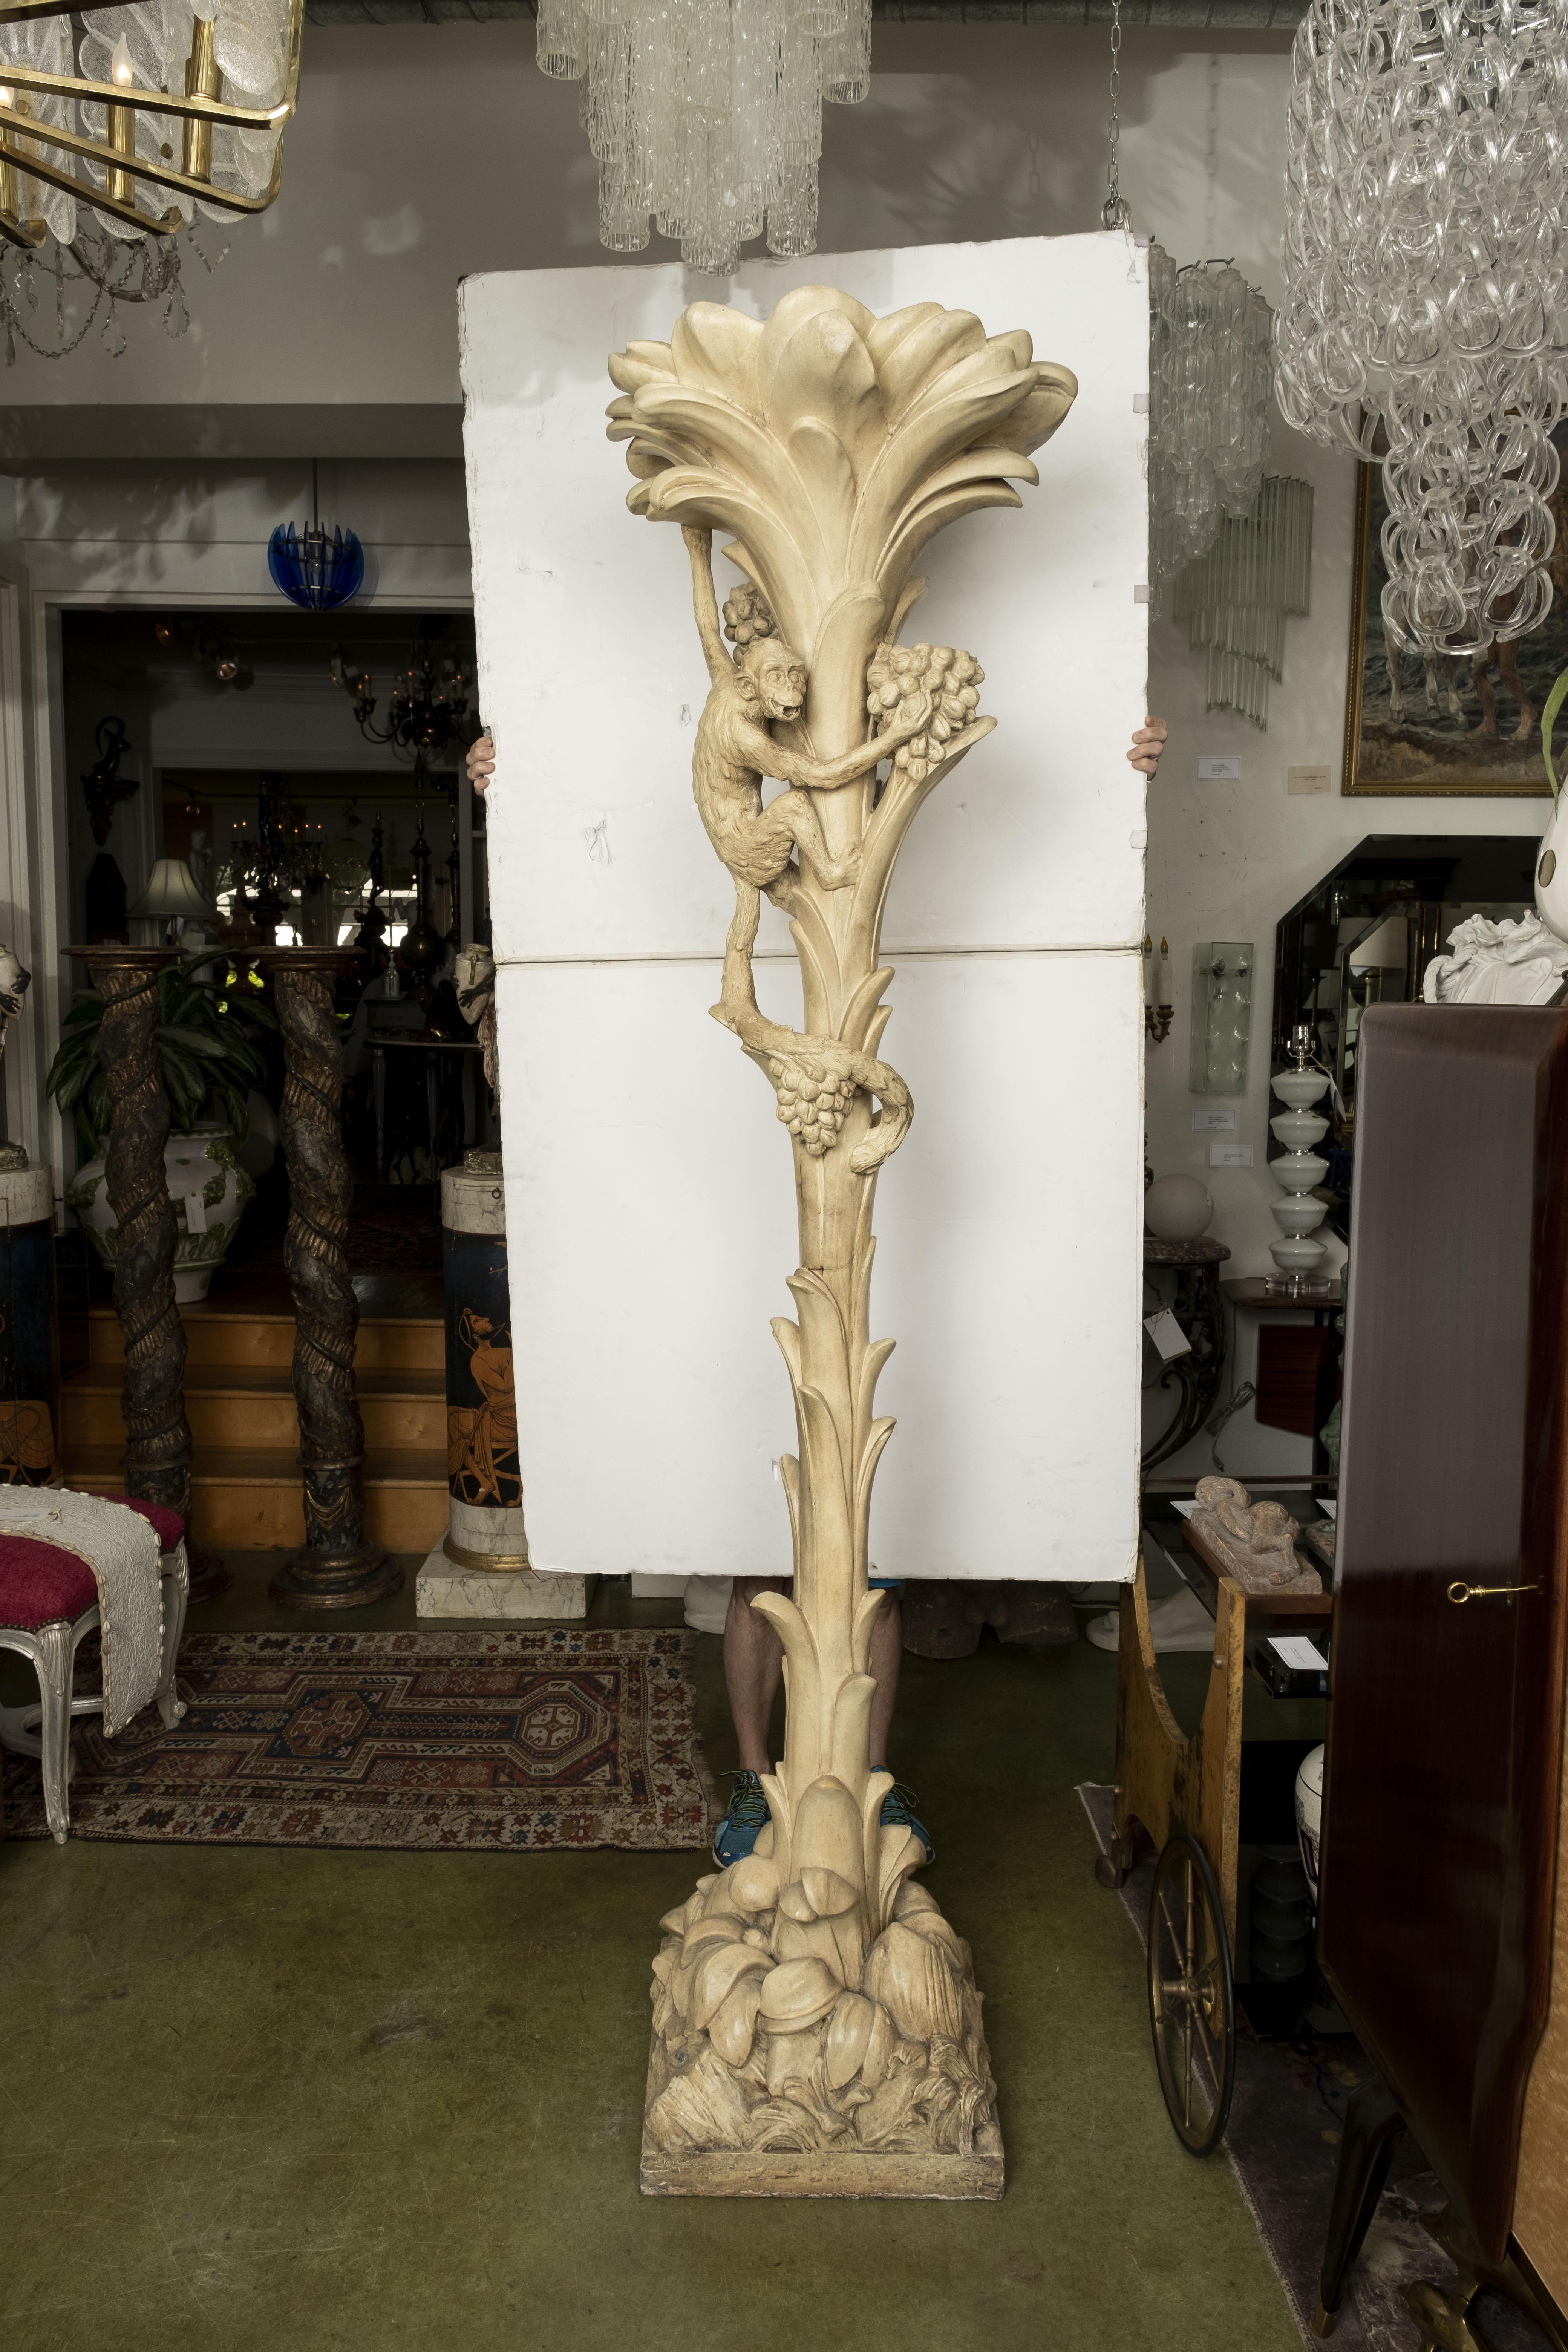 Pair of French Torchieres or floor lamps with monkeys attributed to Serge Roche. This stunning pair of heavy weight french palm tree Torchères with a monkey and three separate lights each plus a lighted top. These tall French palm tree floor lamps